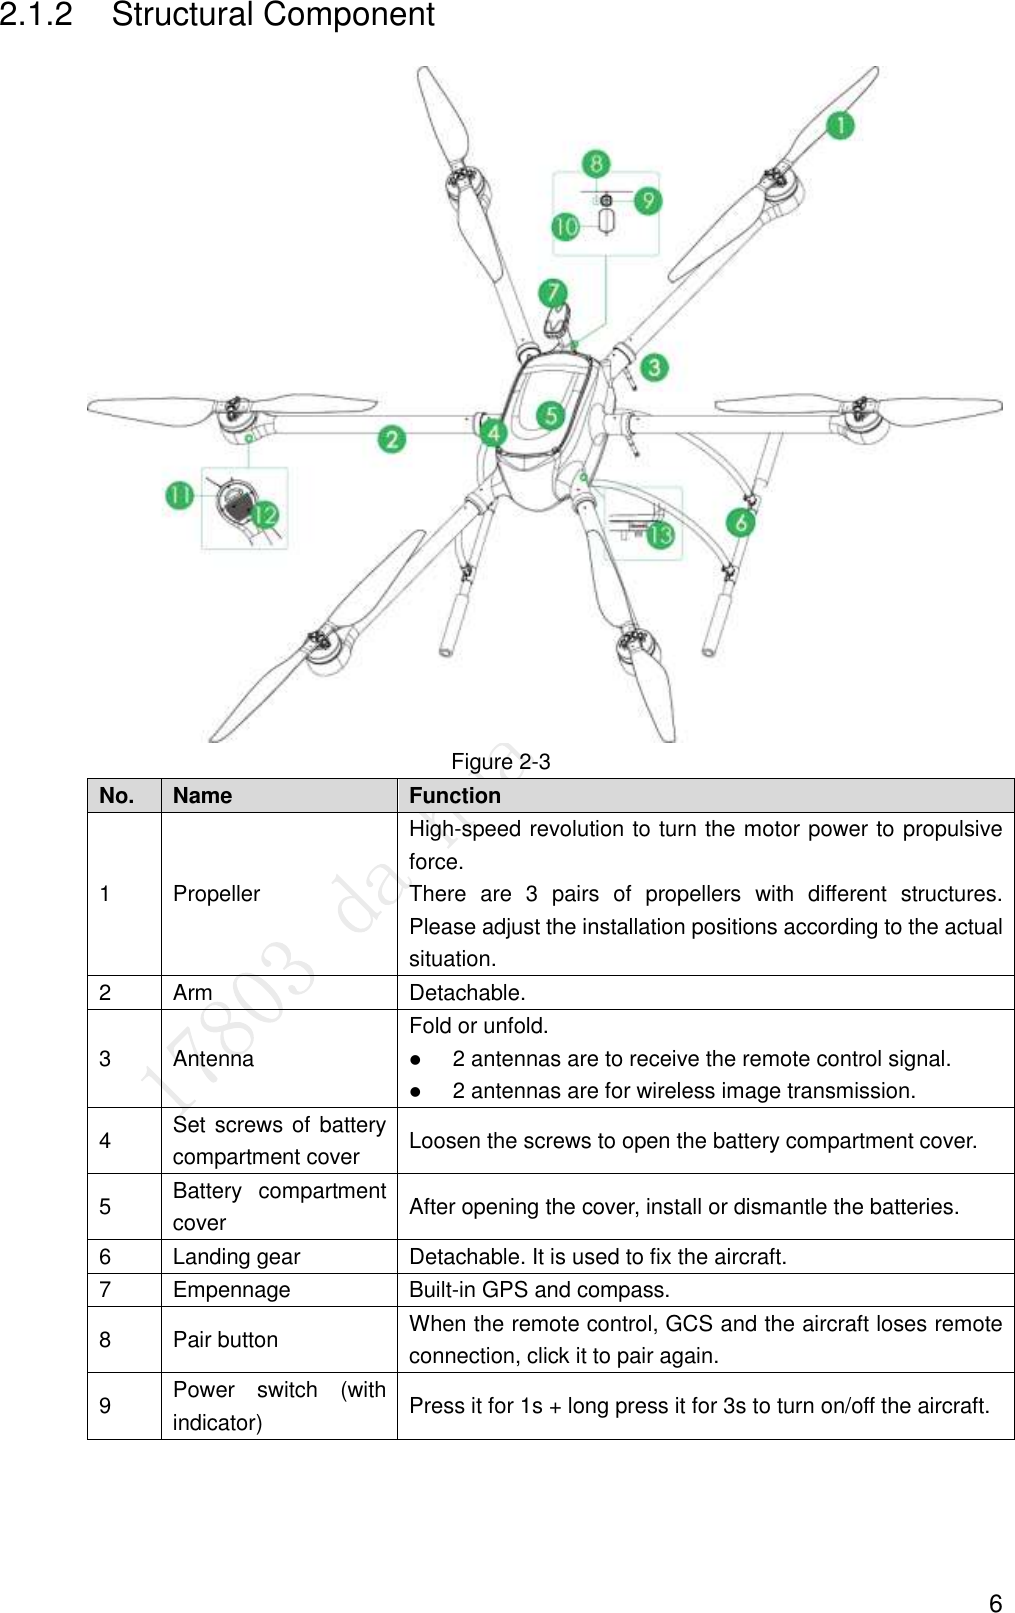  6 2.1.2  Structural Component  Figure 2-3 No. Name Function   1 Propeller High-speed revolution to turn the motor power to propulsive force.   There  are  3  pairs  of  propellers  with  different  structures. Please adjust the installation positions according to the actual situation. 2 Arm Detachable.   3 Antenna Fold or unfold.  2 antennas are to receive the remote control signal.  2 antennas are for wireless image transmission. 4 Set screws of battery compartment cover Loosen the screws to open the battery compartment cover. 5 Battery  compartment cover After opening the cover, install or dismantle the batteries.   6 Landing gear Detachable. It is used to fix the aircraft.   7 Empennage Built-in GPS and compass.   8 Pair button When the remote control, GCS and the aircraft loses remote connection, click it to pair again. 9 Power  switch  (with indicator) Press it for 1s + long press it for 3s to turn on/off the aircraft. 